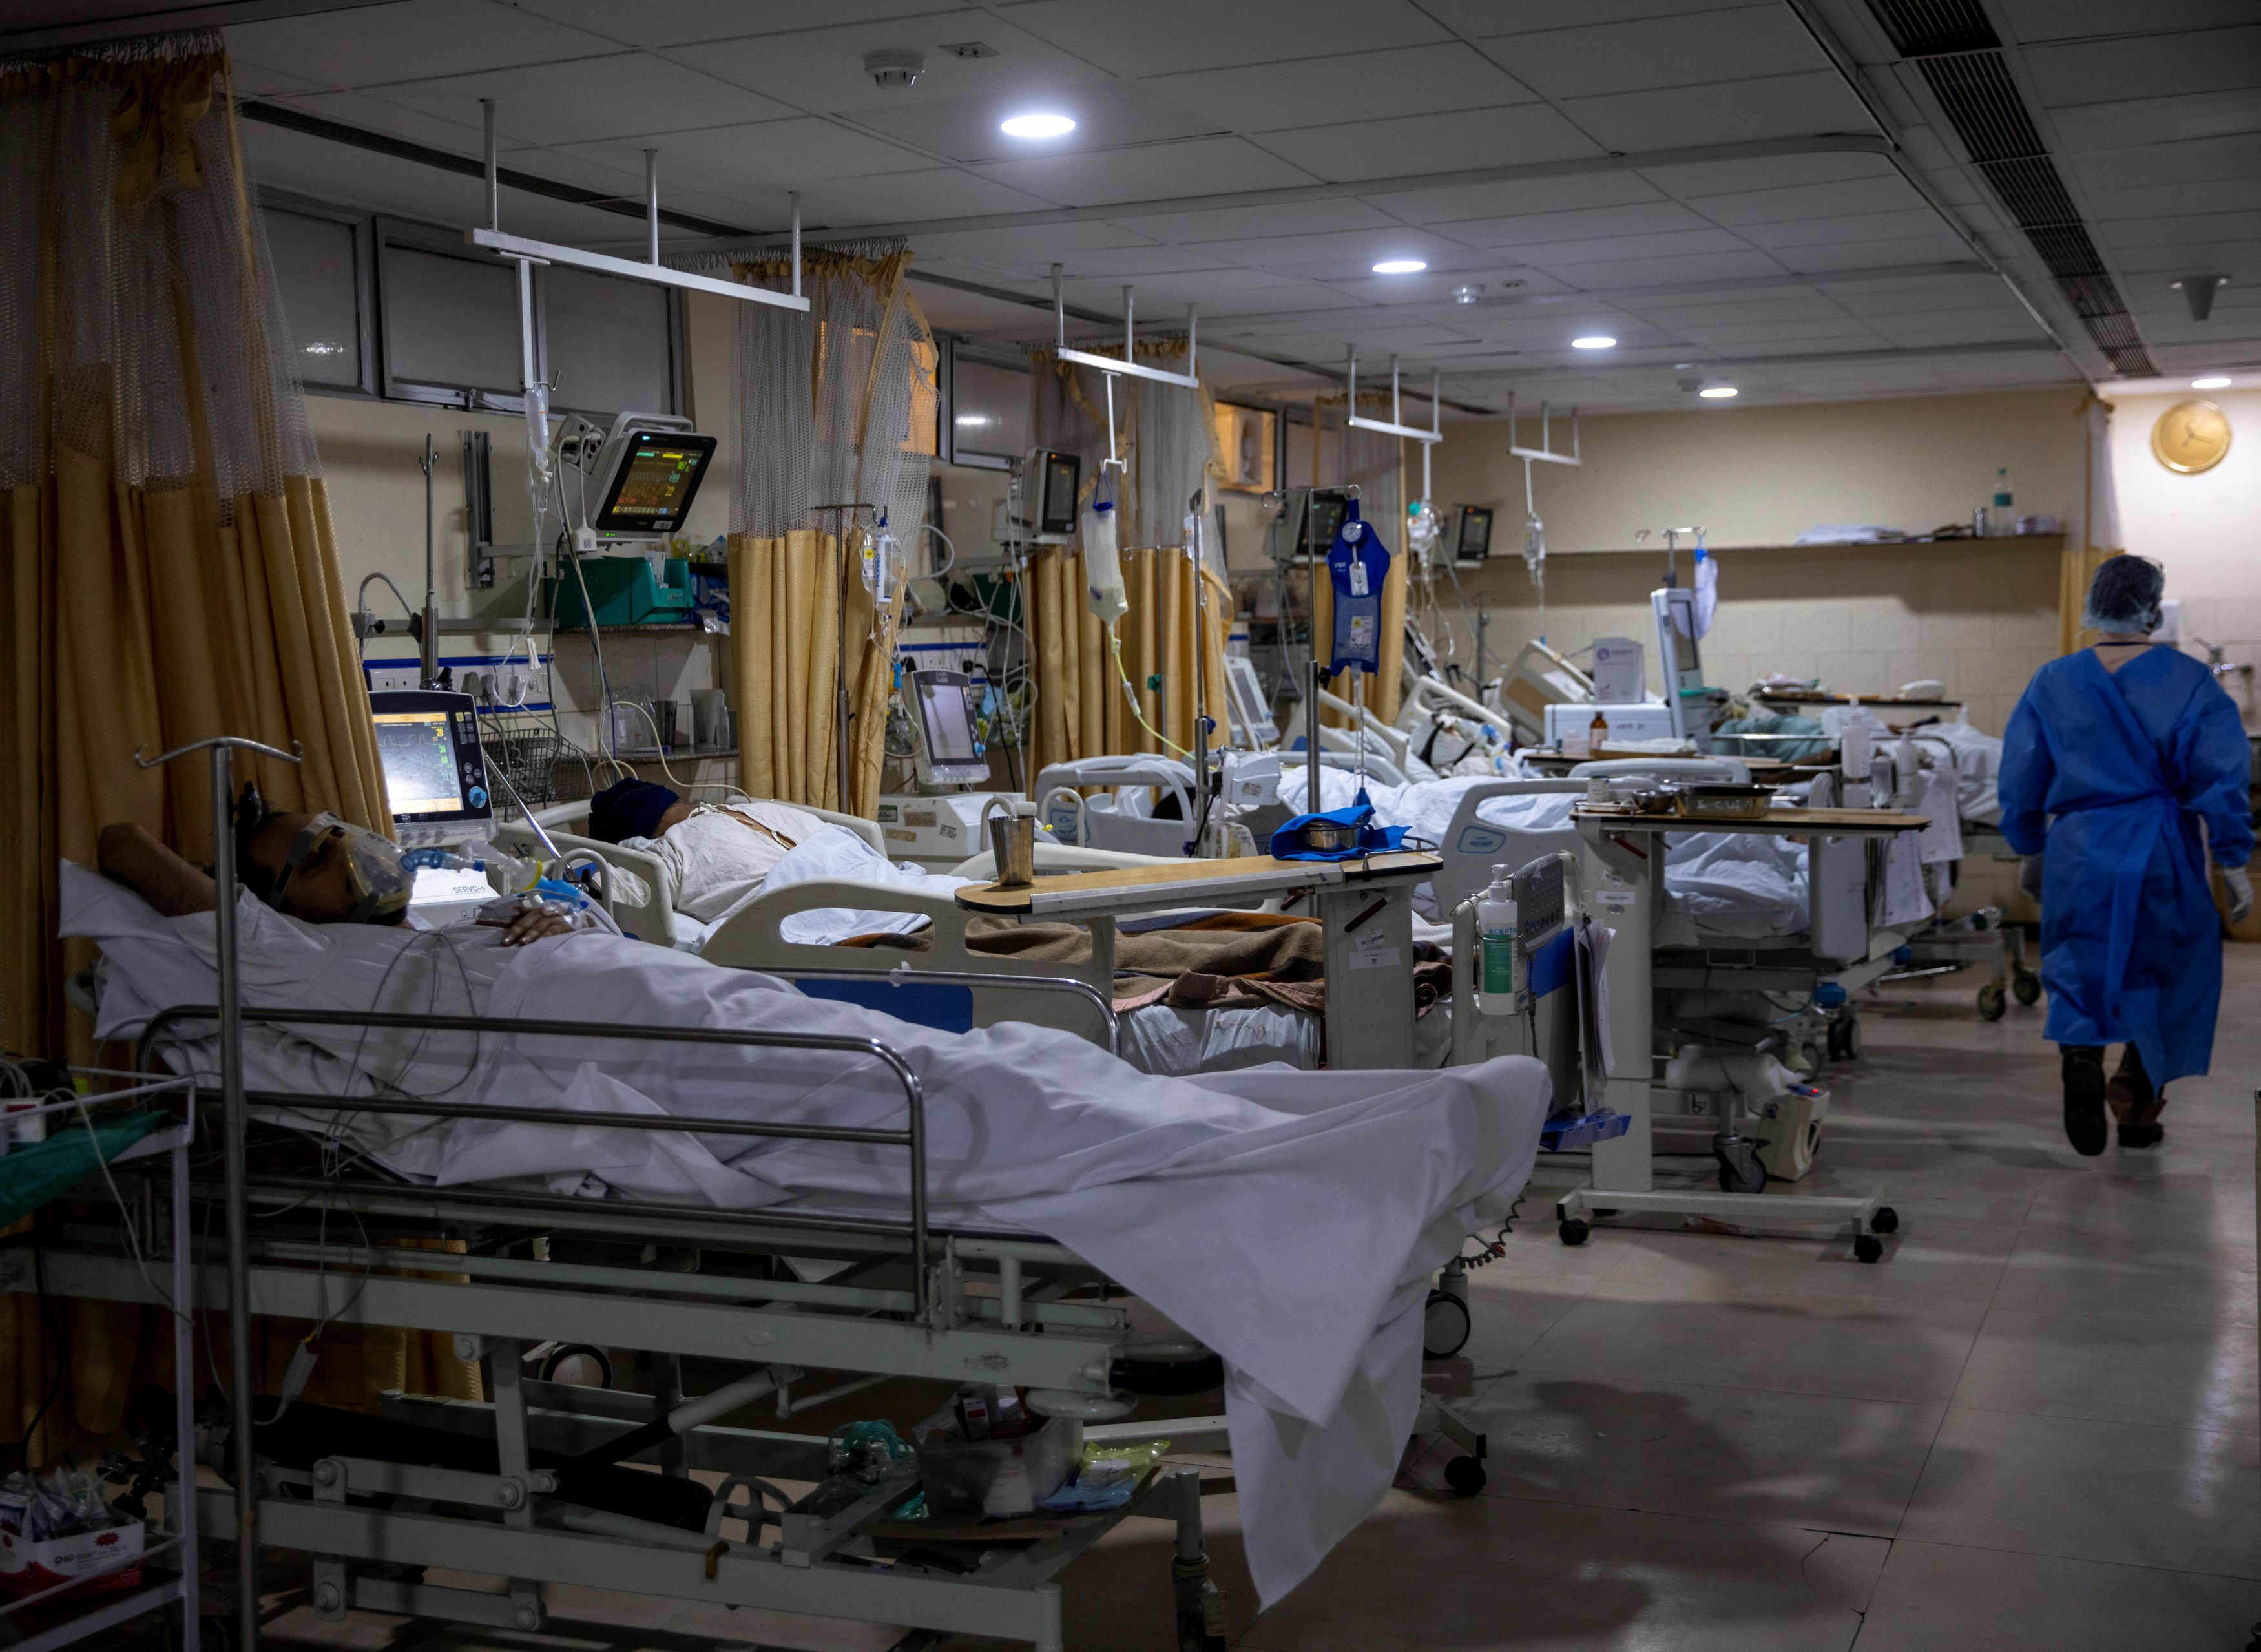 Patients suffering from the coronavirus disease (COVID-19) are seen inside the ICU ward at Holy Family Hospital in New Delhi